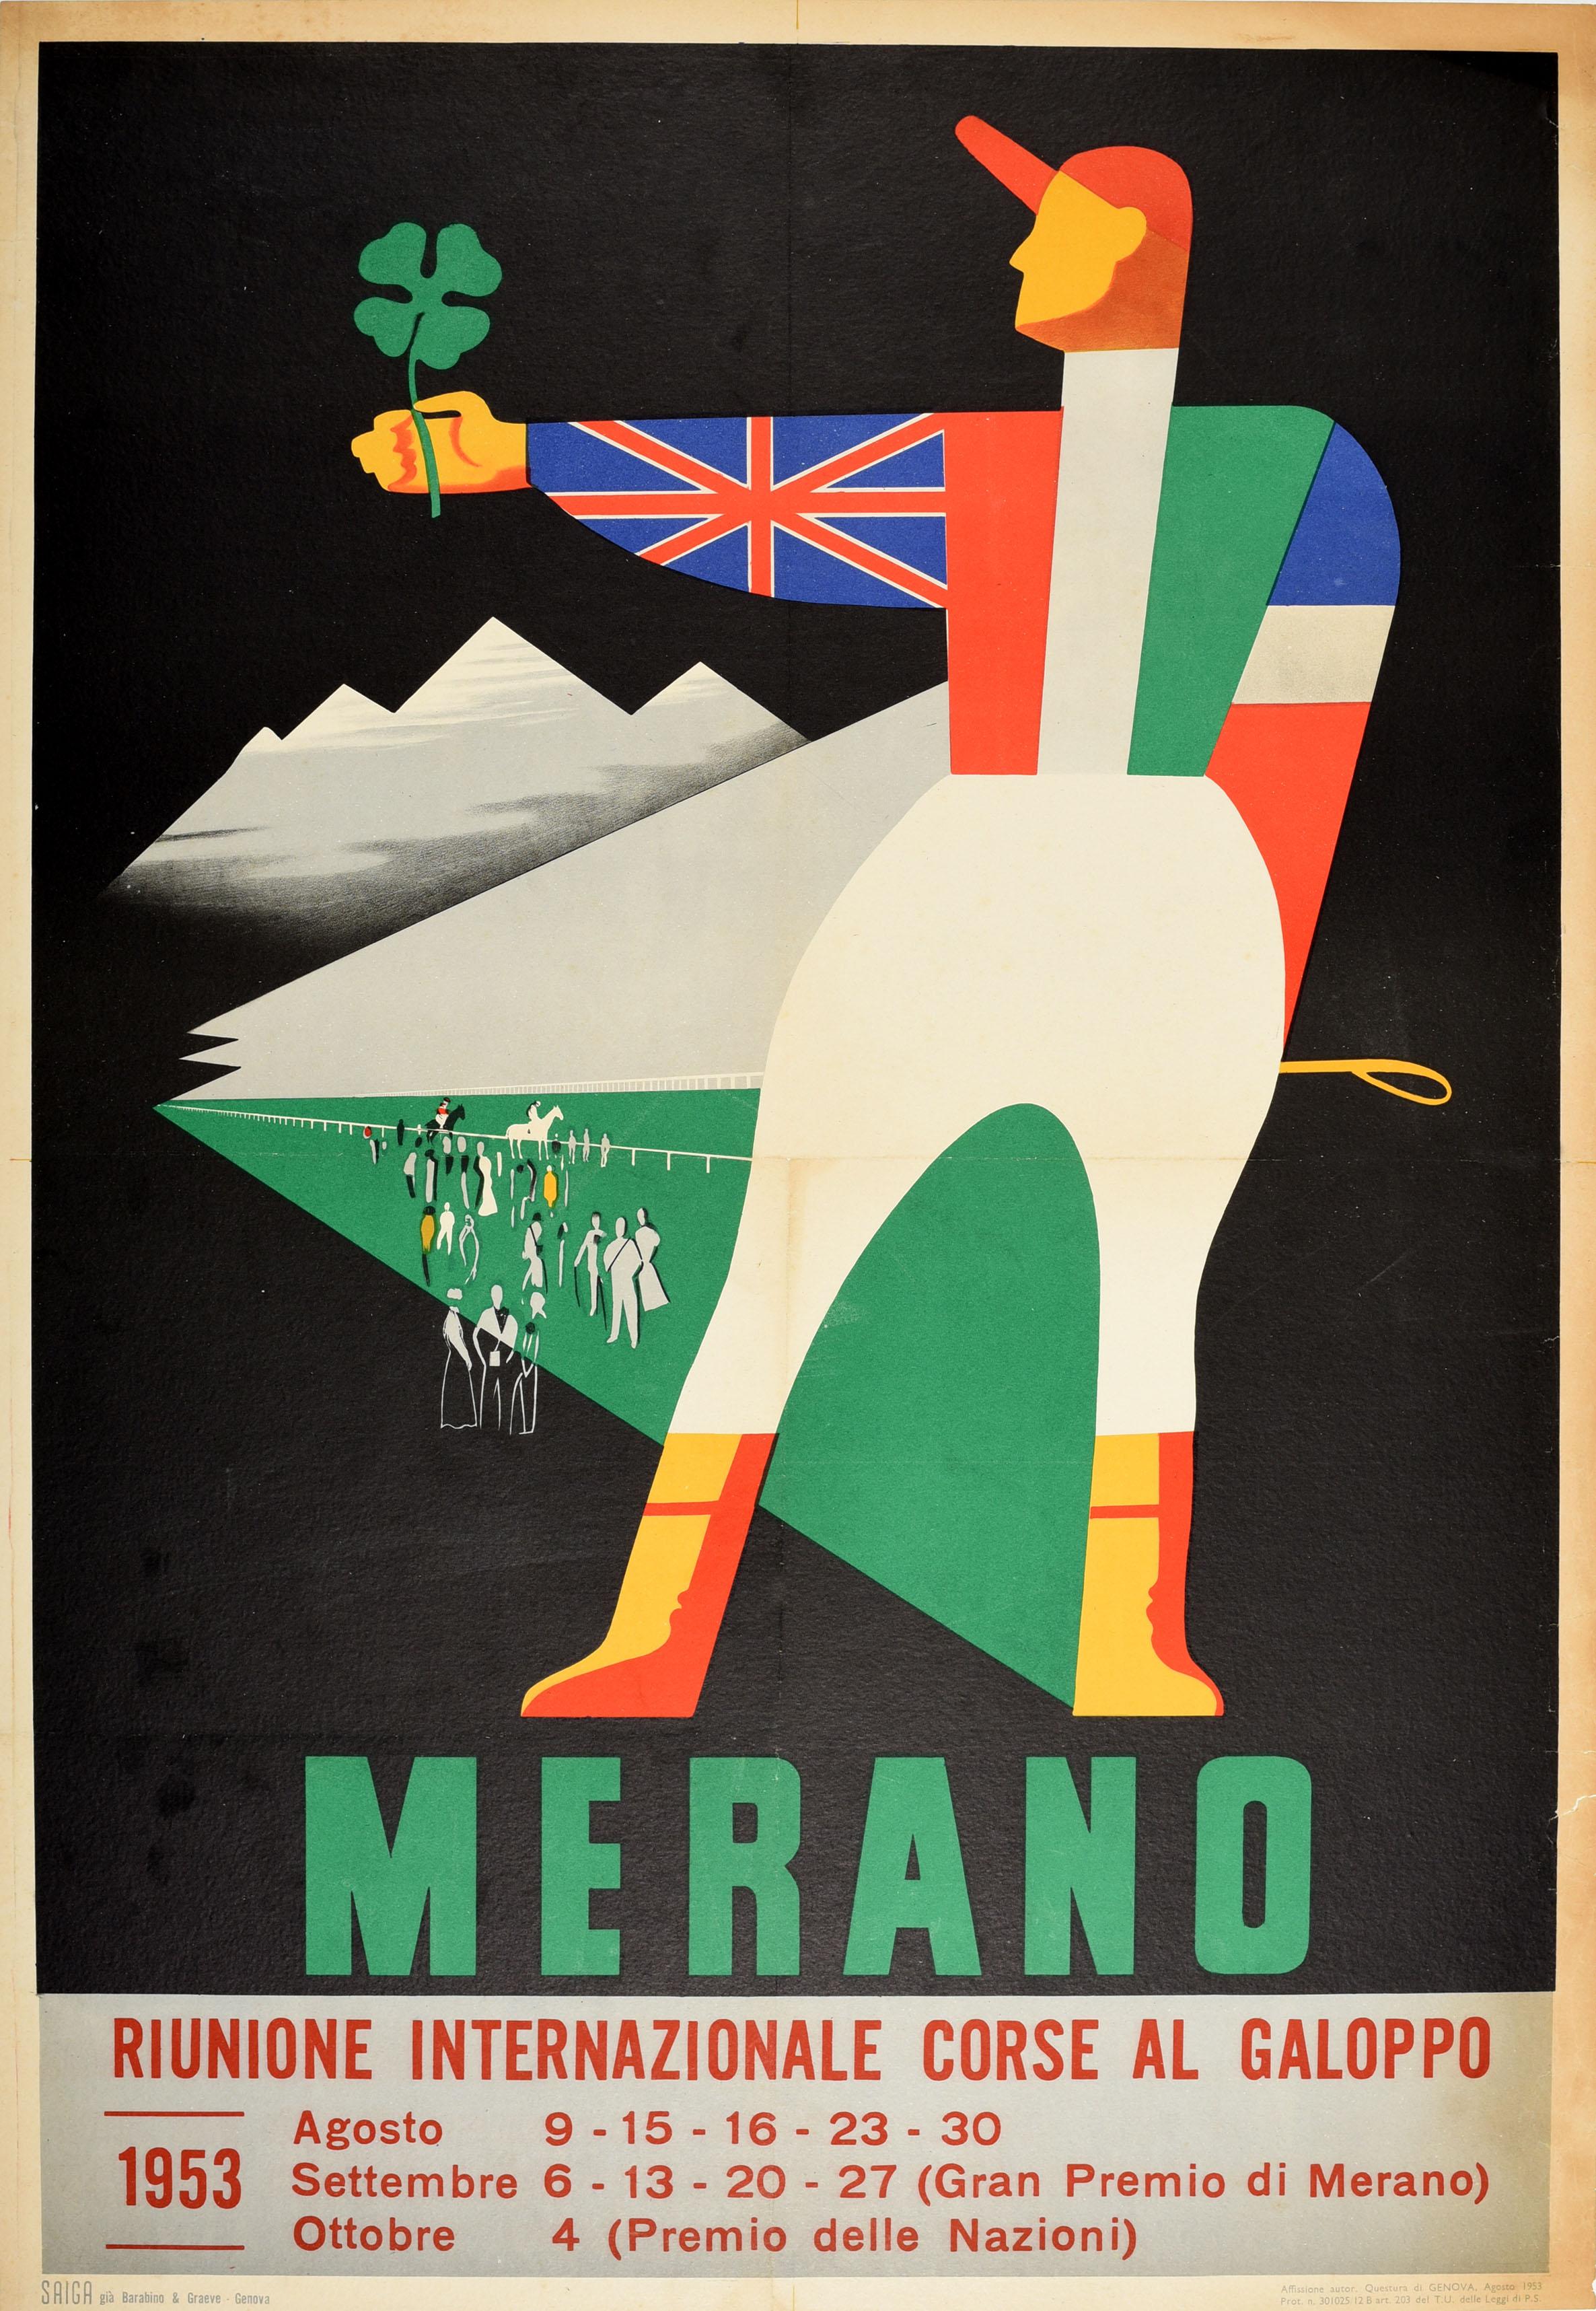 Original vintage sport event travel poster for Merano - International Meeting of Gallop Racing / Riunione Internazionale Corse Al Galoppo - featuring a stunning graphic design of a jockey with the Union Jack flag and the flags of France and Italy on